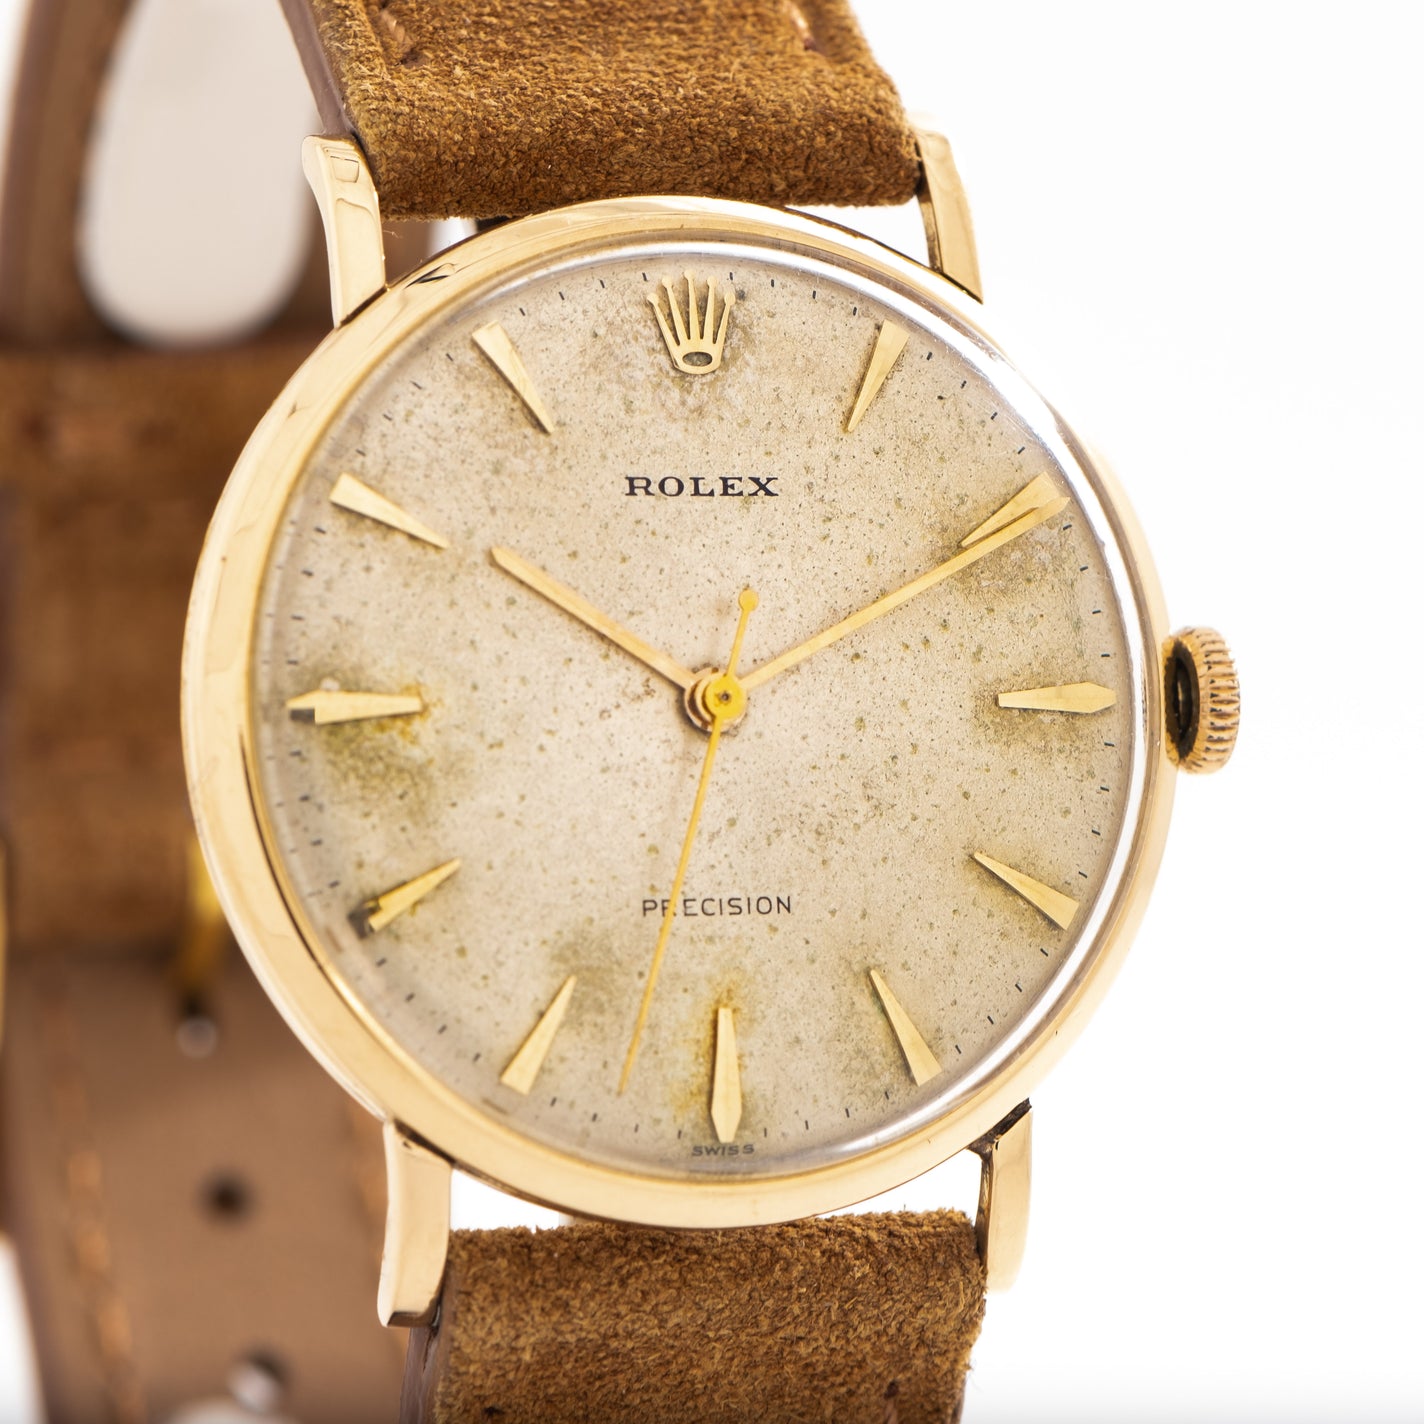 1950's Vintage Rolex Precision Ref. 9659 Solid Yellow Gold Watch ( – Second Time Around Watch